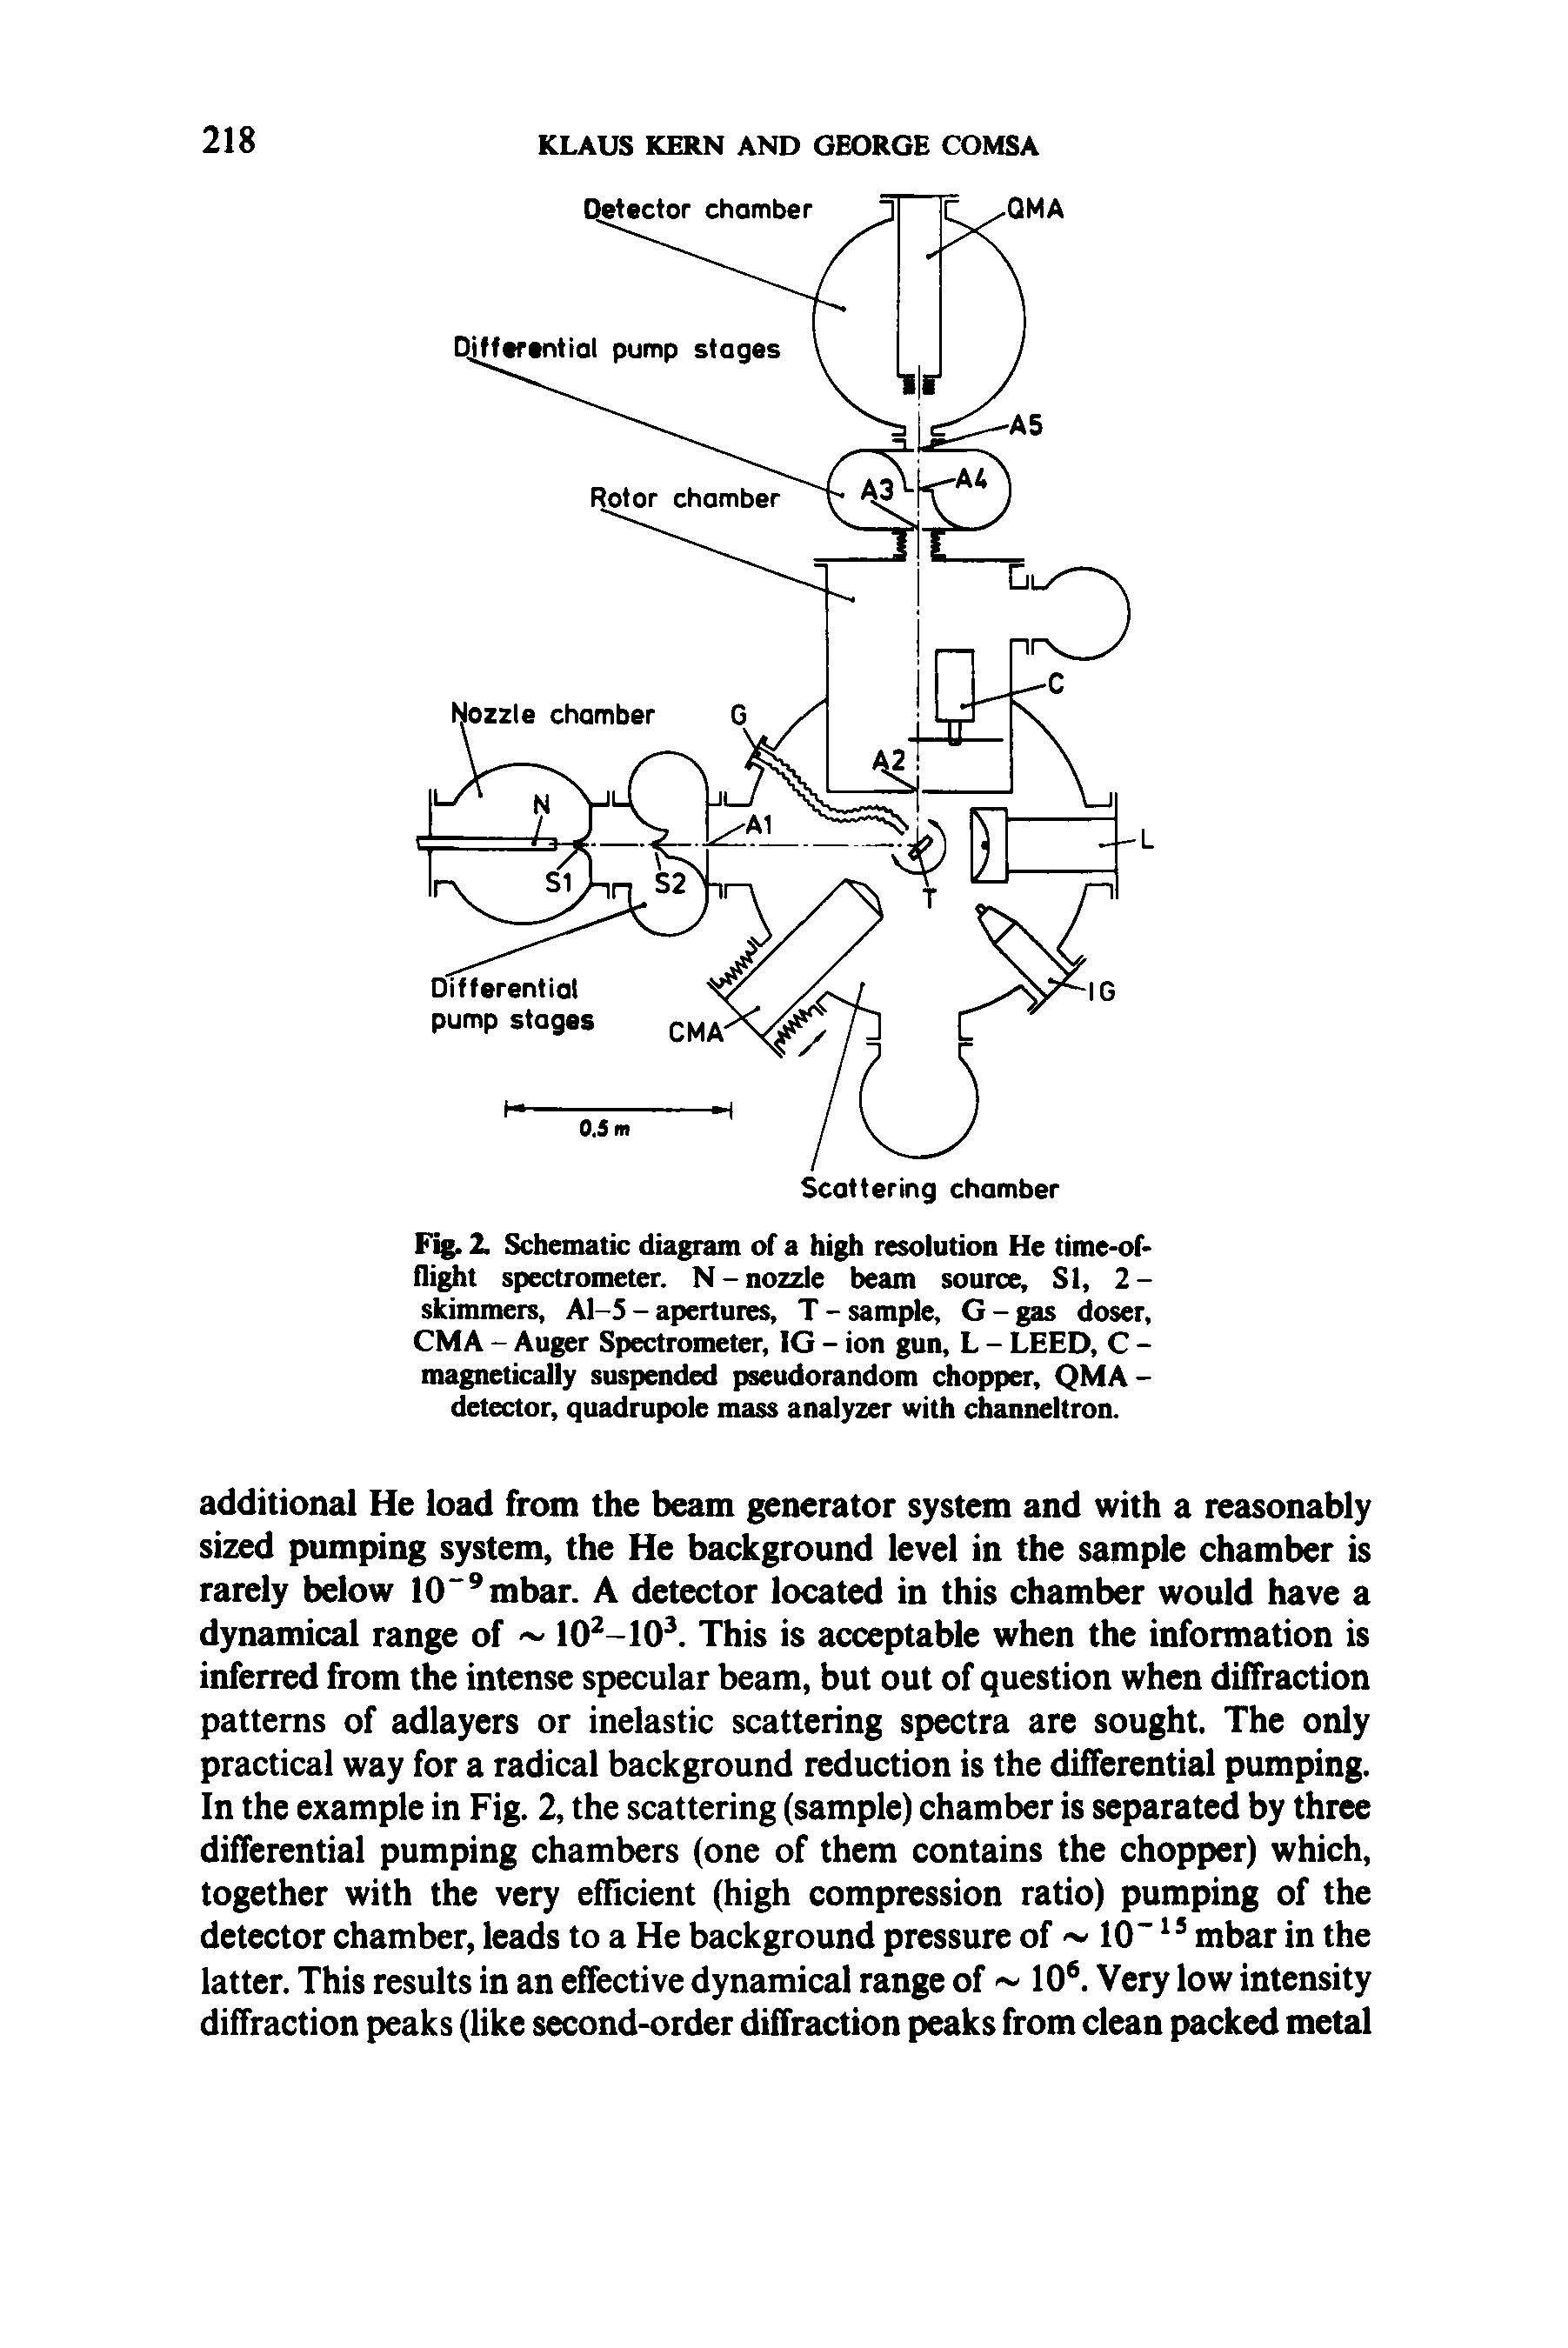 Fig. 2. Schematic diagram of a high resolution He time-of-flight spectrometer. N-nozzle beam source, SI, 2-skimmers, Al-5 - apertures, T - sample, G - gas doser, CMA - Auger Spectrometer, IG - ion gun, L - LEED, C -magnetically suspended pseudorandom chopper, QMA-detector, quadrupole mass analyzer with channeltron.